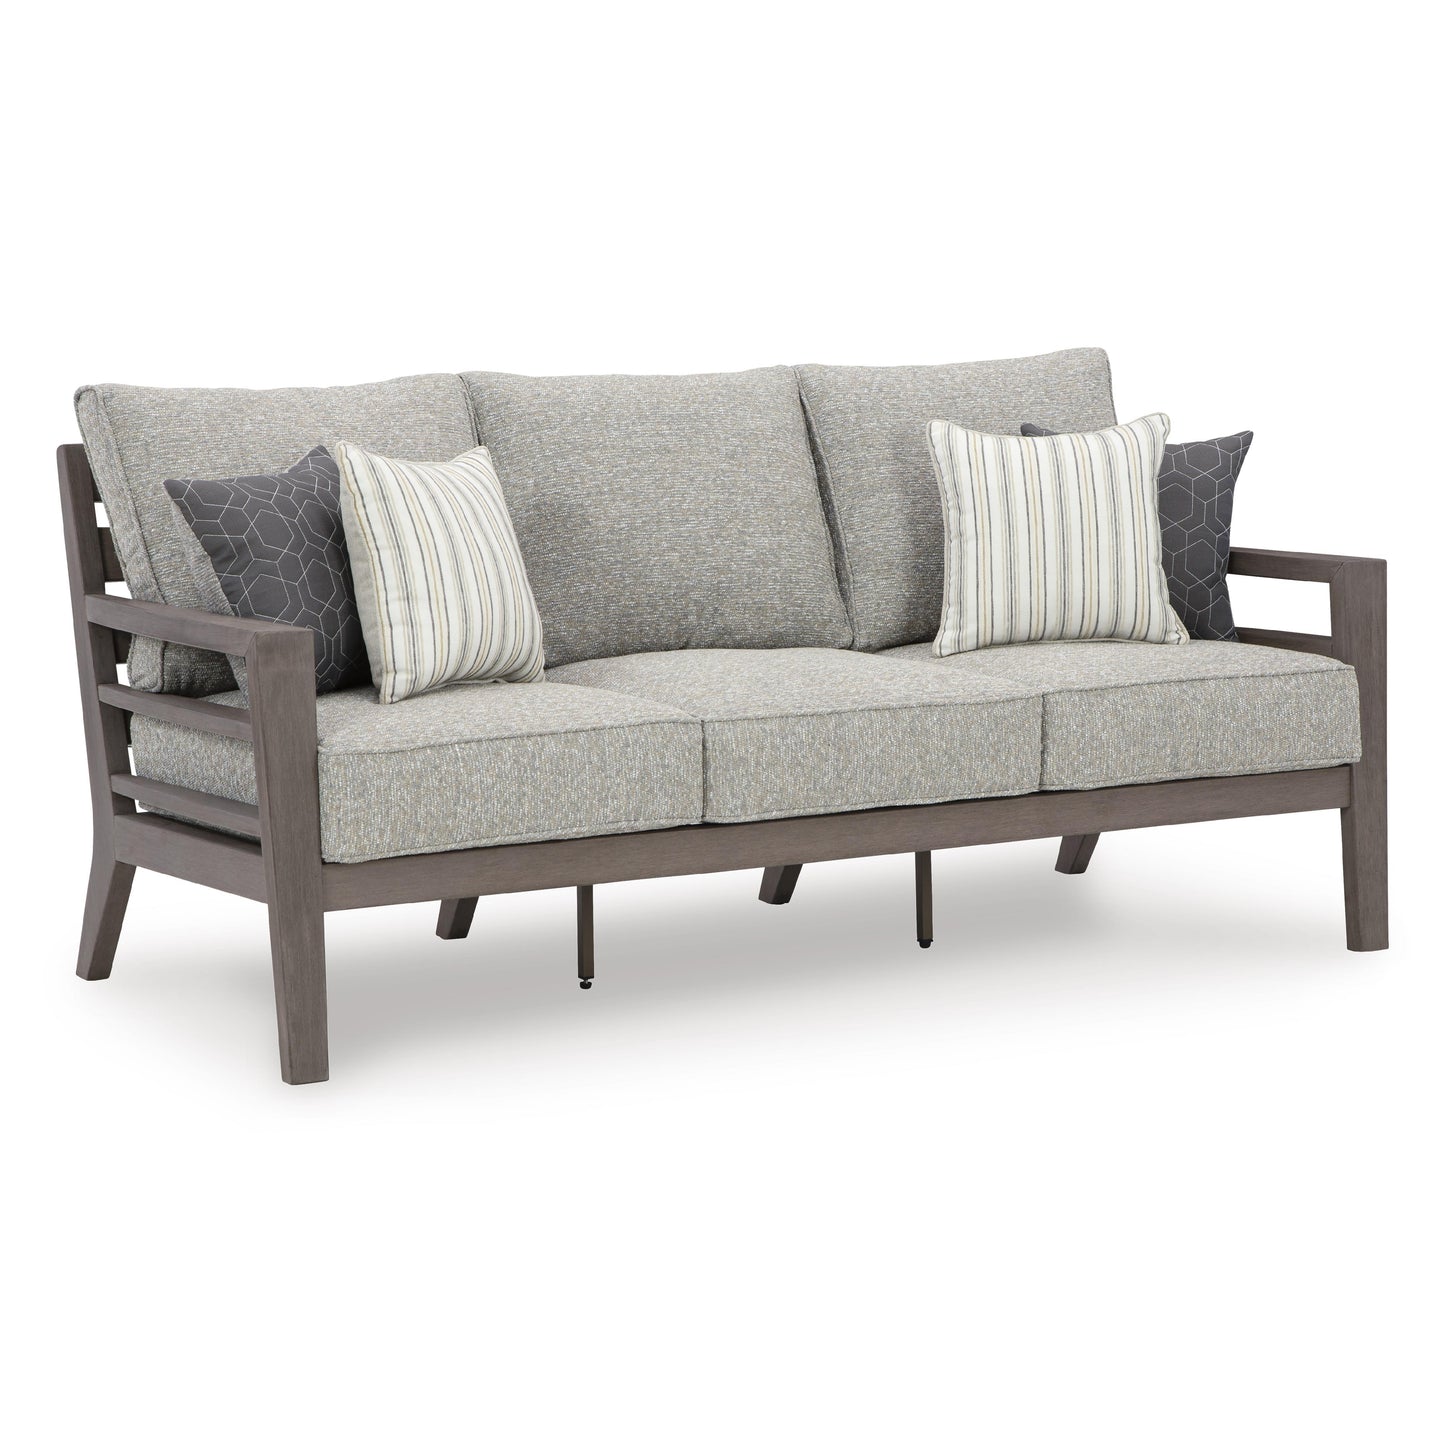 Signature Design by Ashley Outdoor Seating Sofas P564-838 IMAGE 1